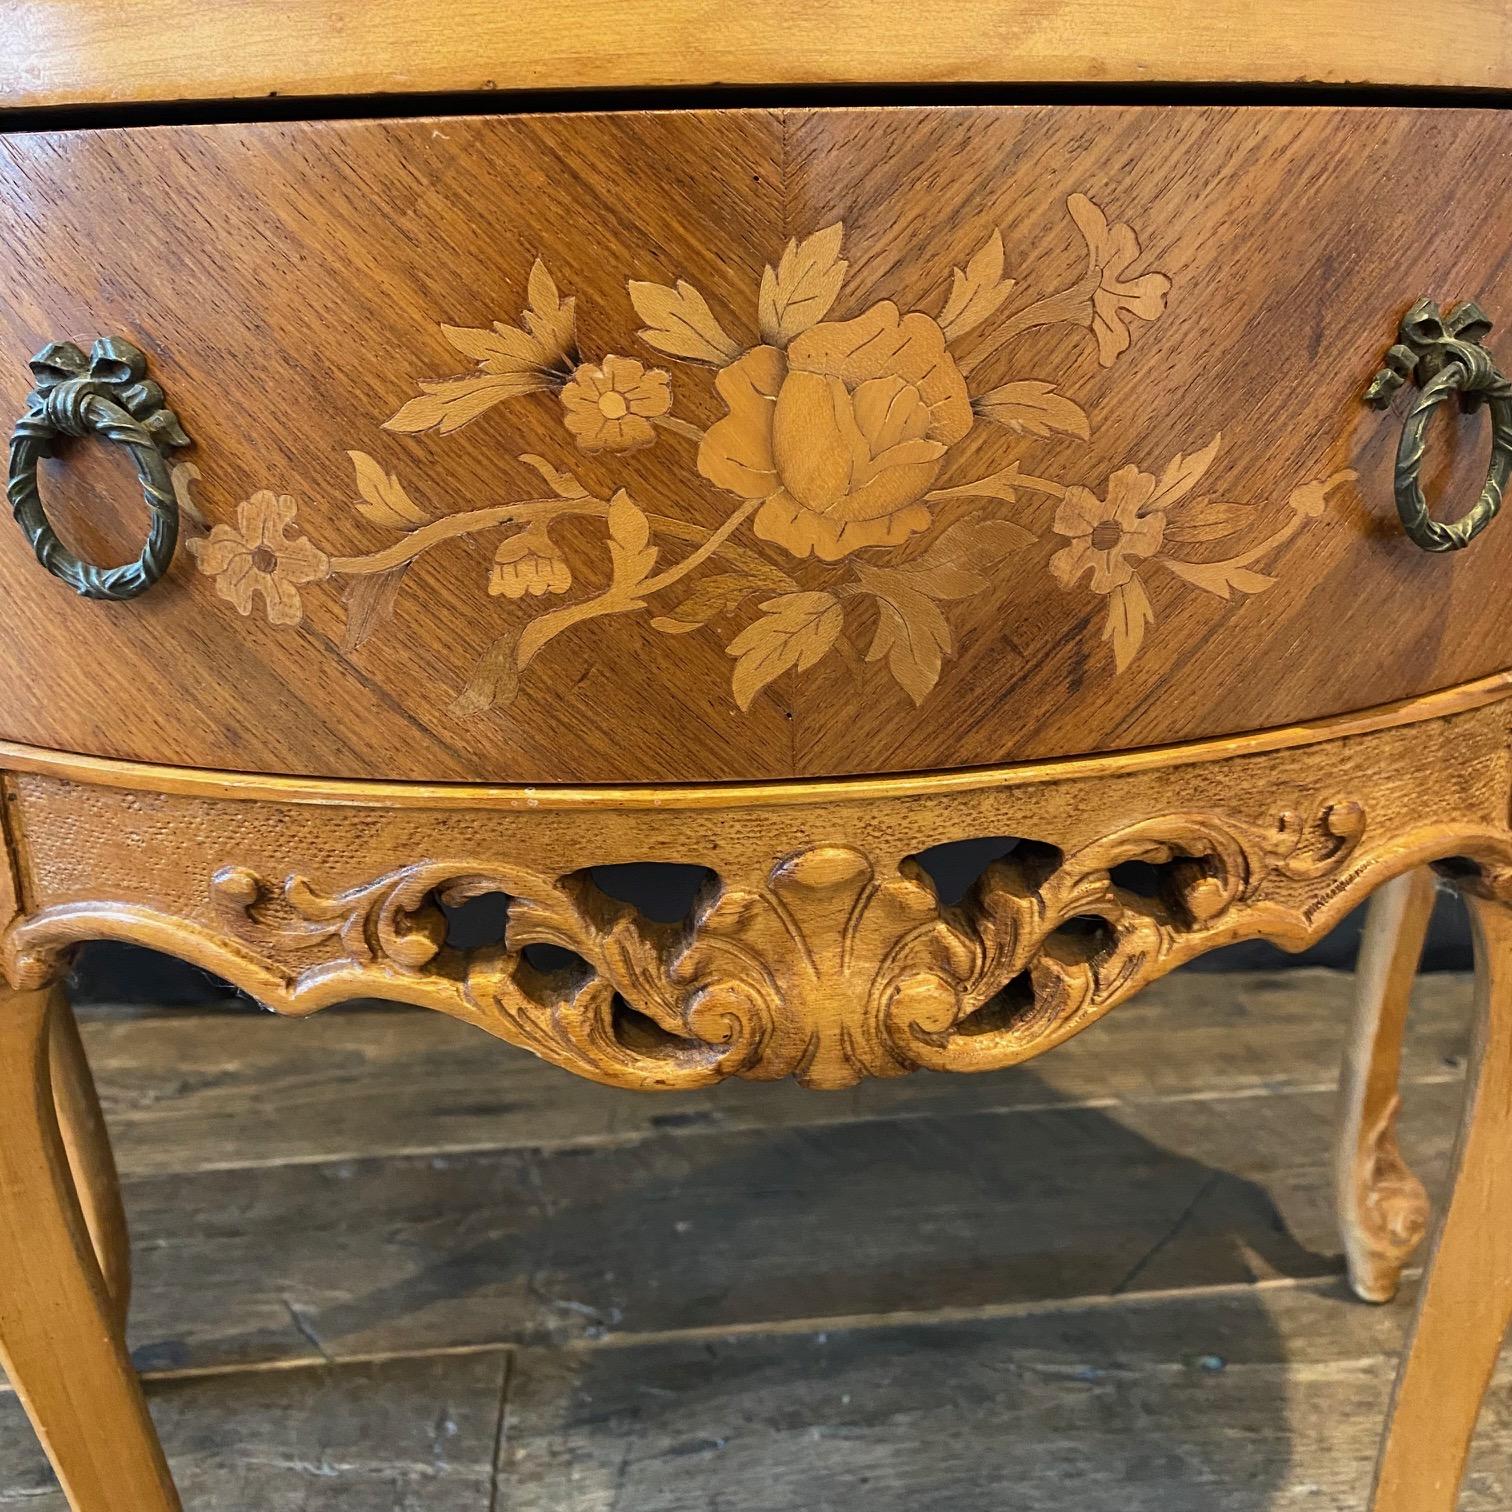 Really lovely 19th century French Louis XV demilune commode with marble top and exquisite floral marquetry.   Lovely ribbon pulls and intricately carved apron with acanthus leaves and crest. Tapered cabriole legs ending in pretty escargot feet with